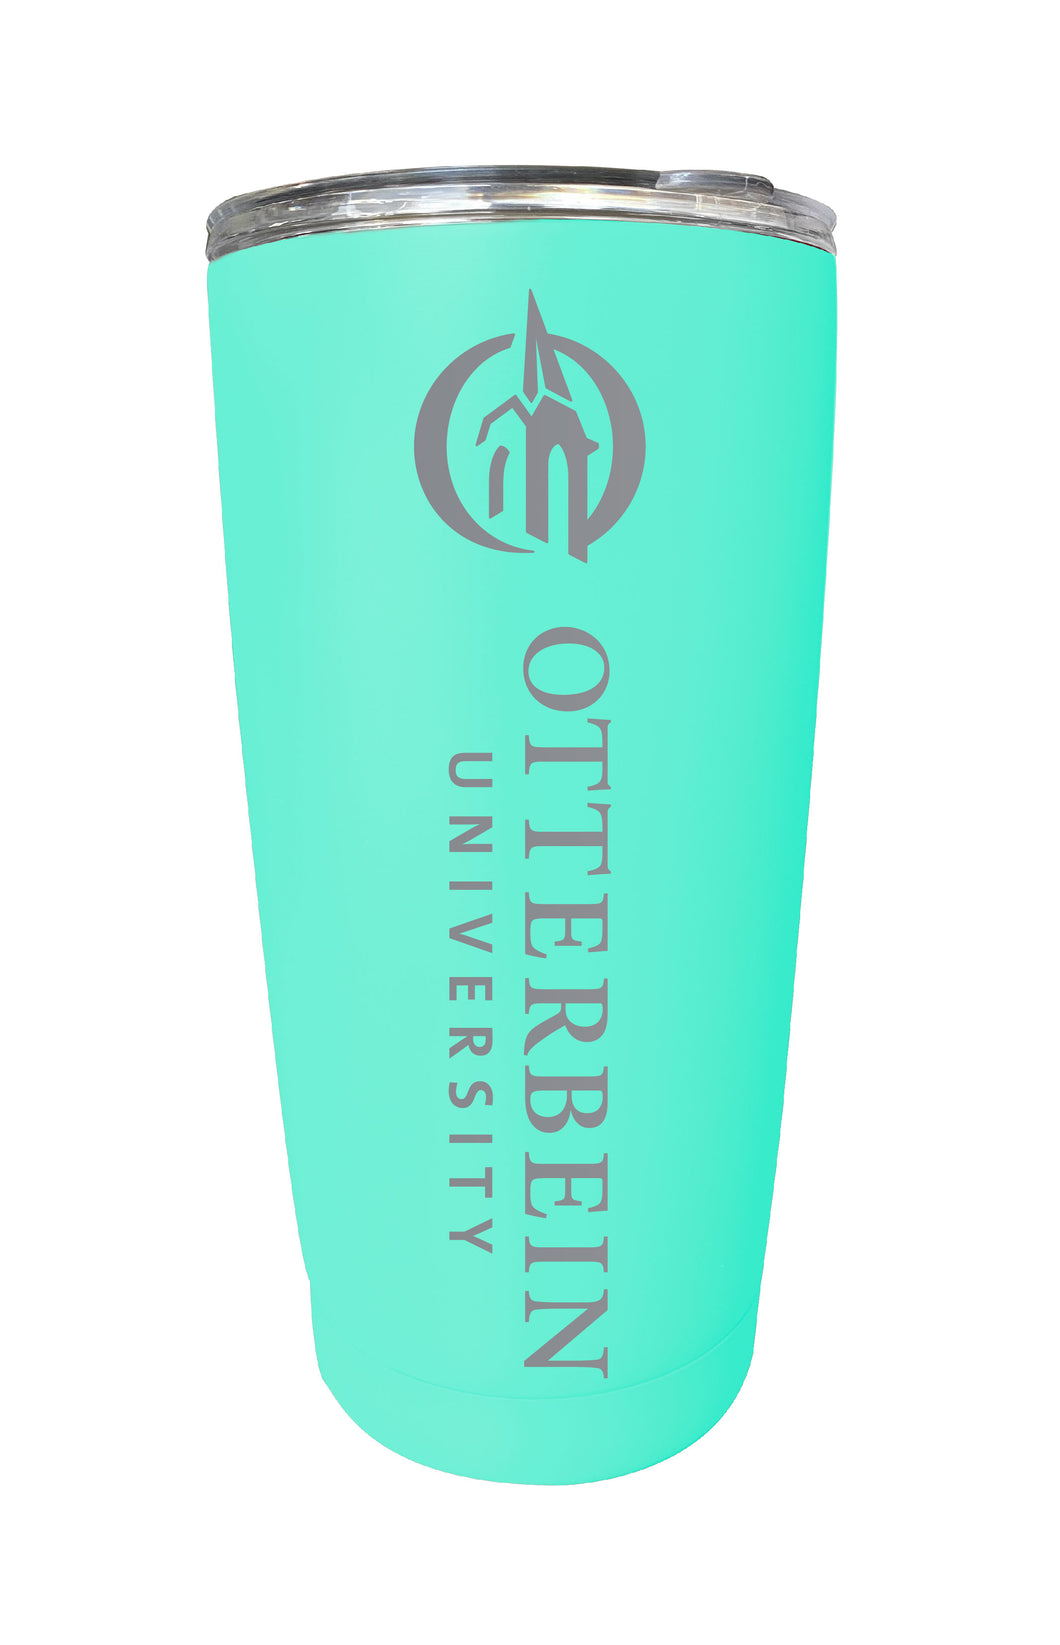 Otterbein University 16 oz Stainless Steel Etched Tumbler - Choose Your Color